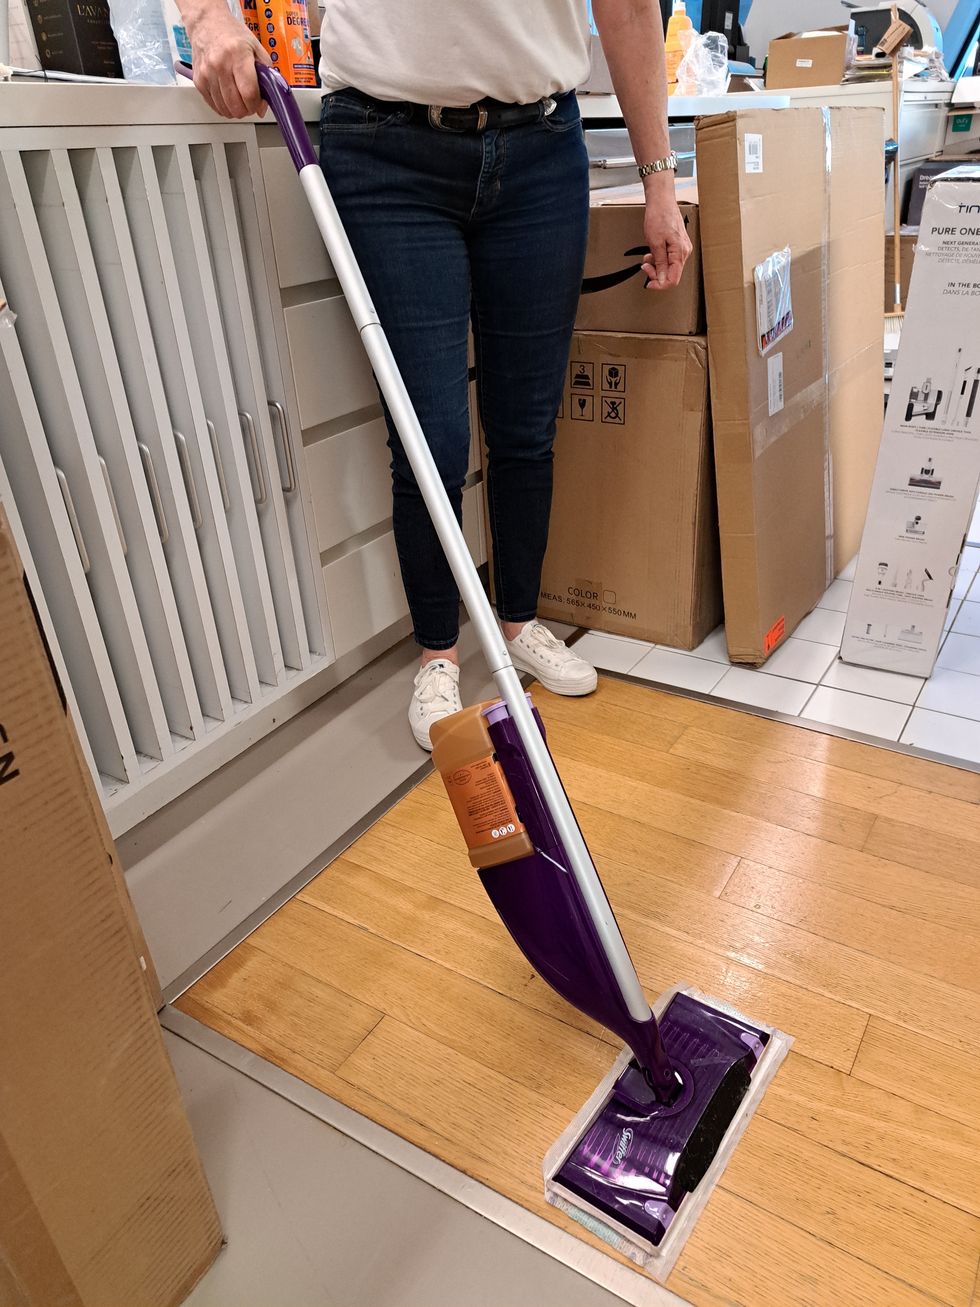 Best Mops and Tools for Every Floor 